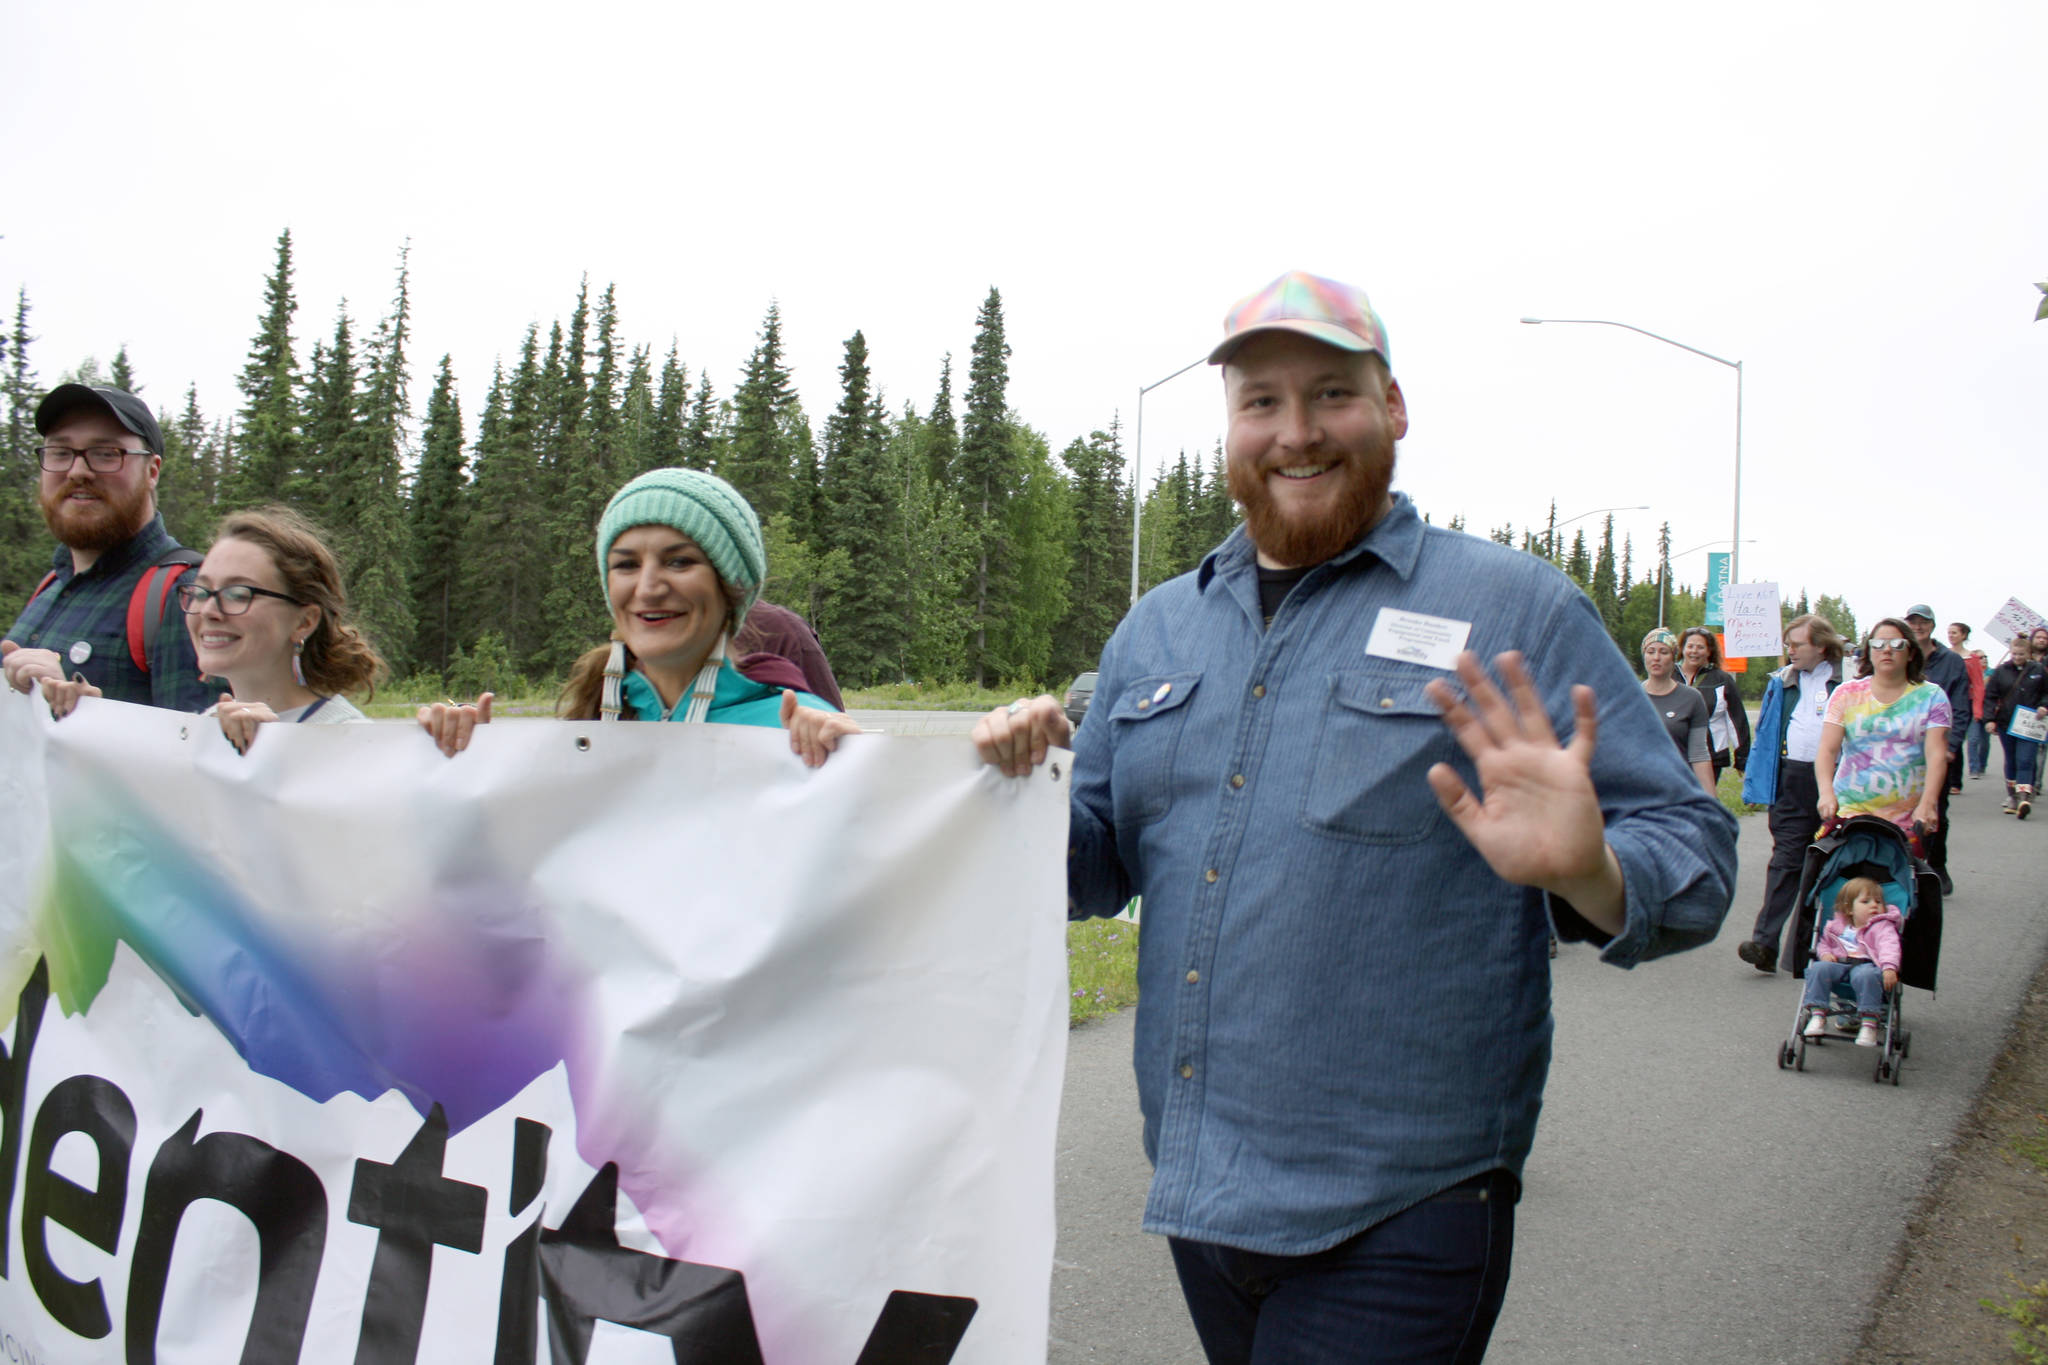 Brooks Banker, director of community engagement and youth programming at the Anchorage-based Identity, participates in the Two Spirit Pride March celebrating LGBTQ Pride. (Photo by Erin Thompson/Peninsula Clarion)